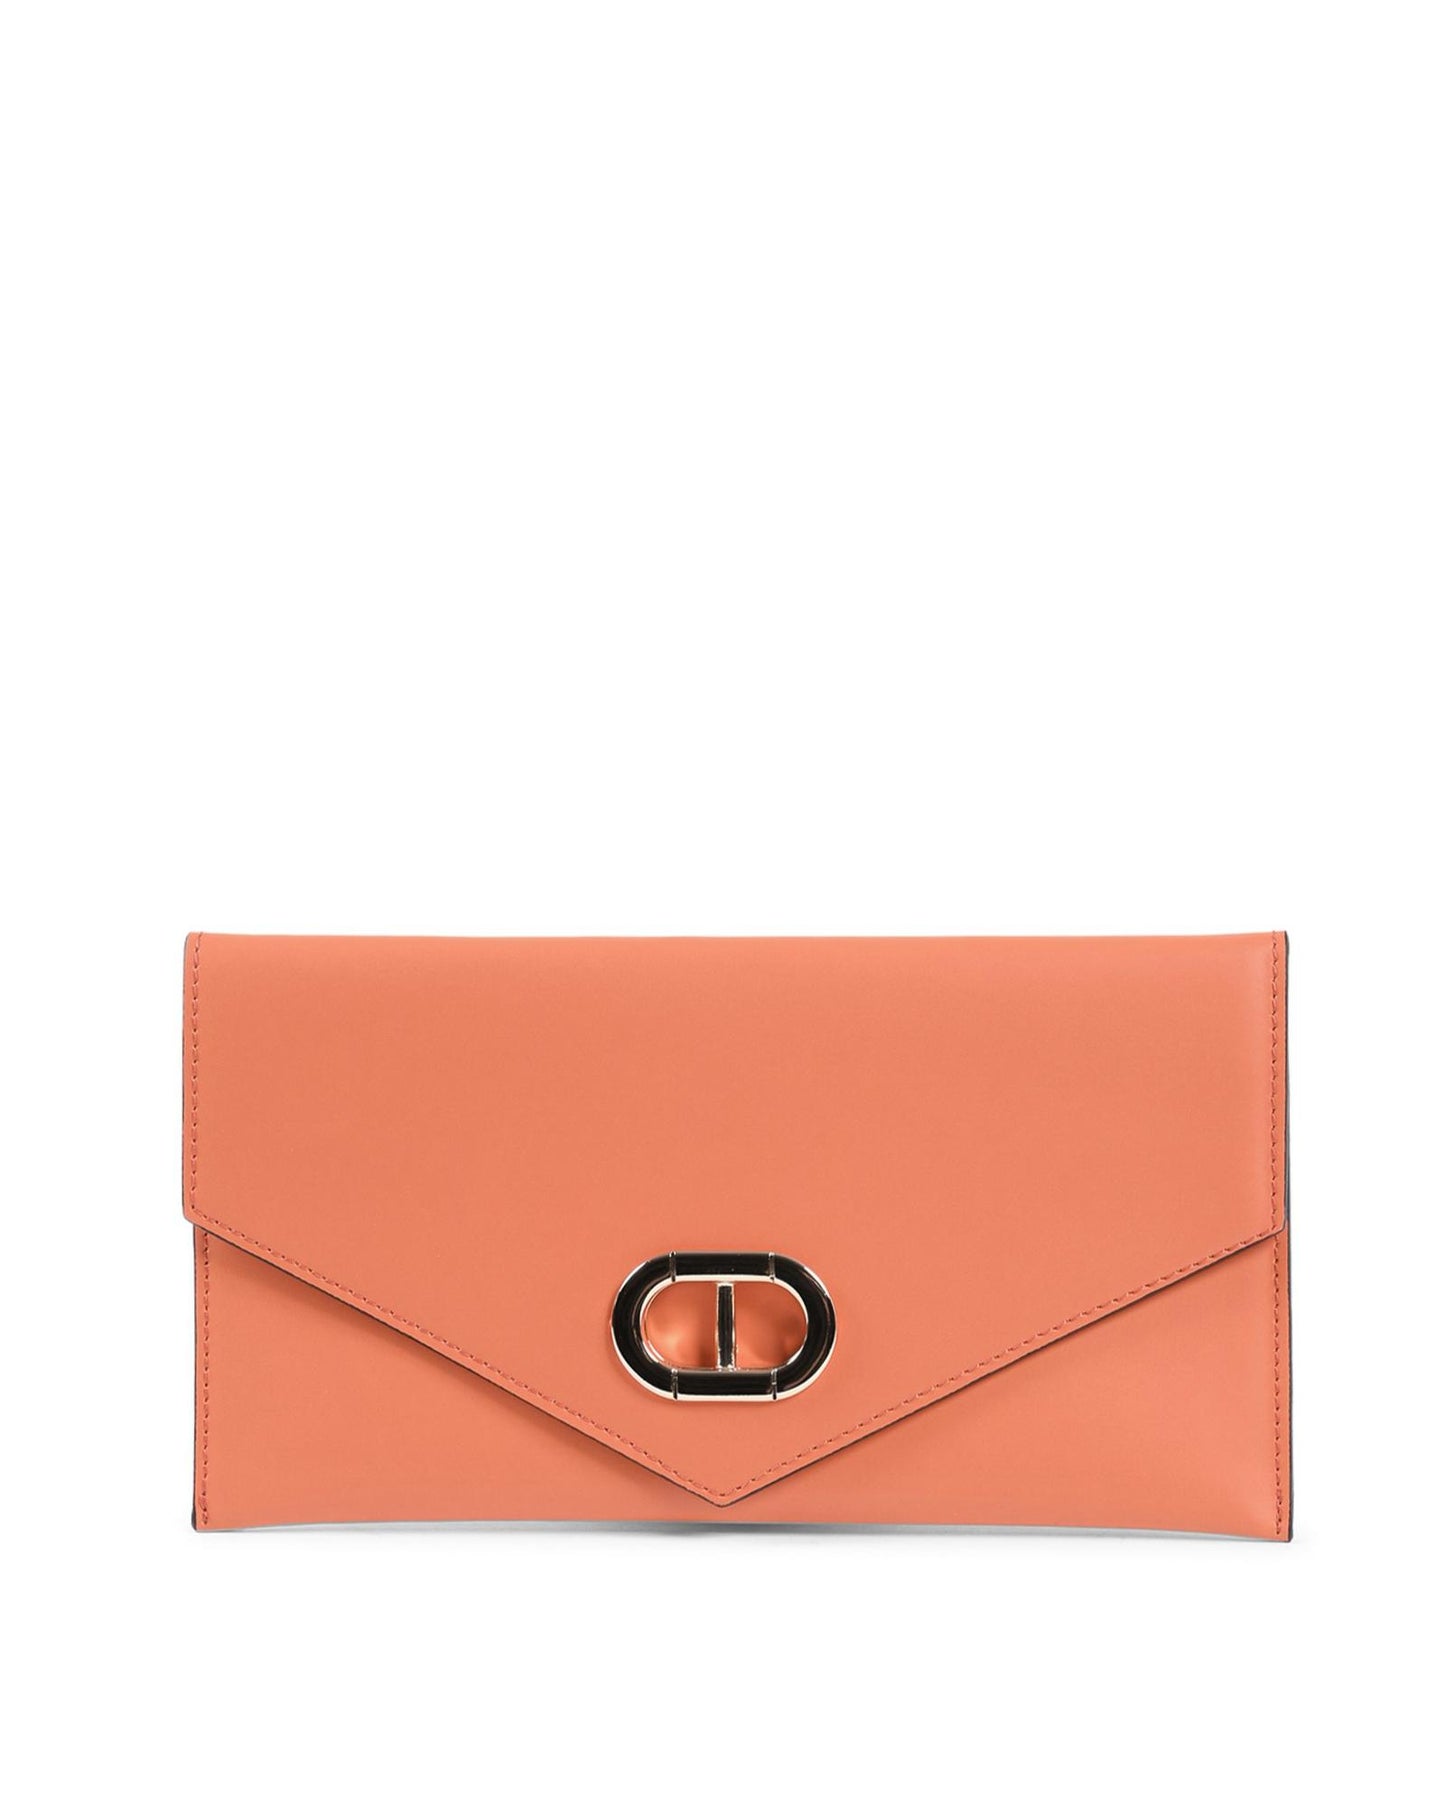 Italian Leather Envelope Clutch - One Size